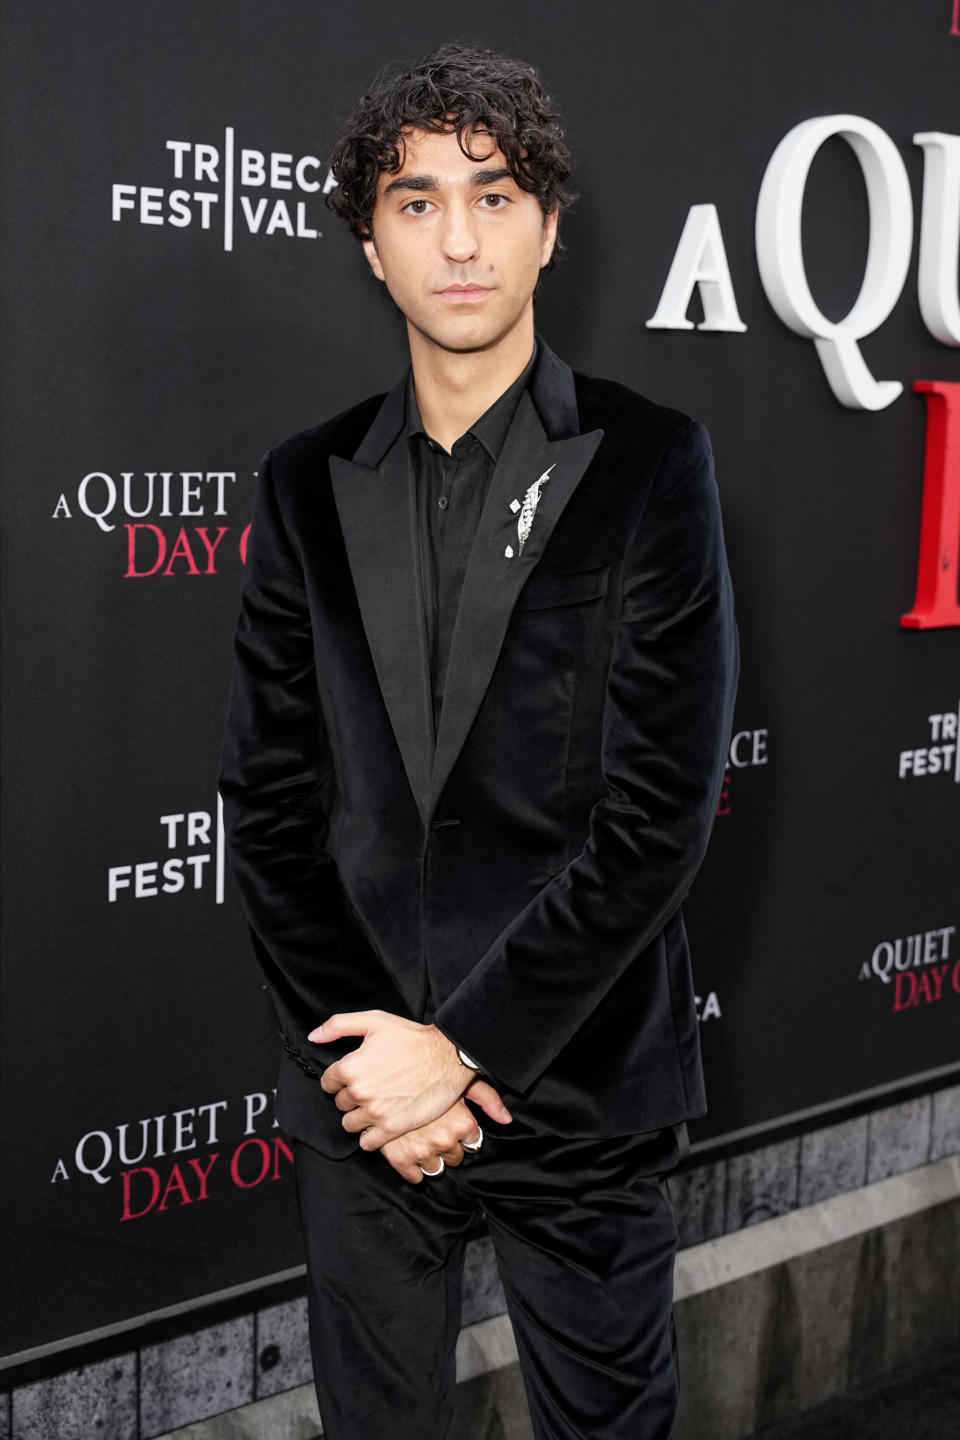 Alex Wolff at the Tribeca Festival for "A Quiet Place Day One" premiere, wearing a black velvet suit with a white floral lapel pin